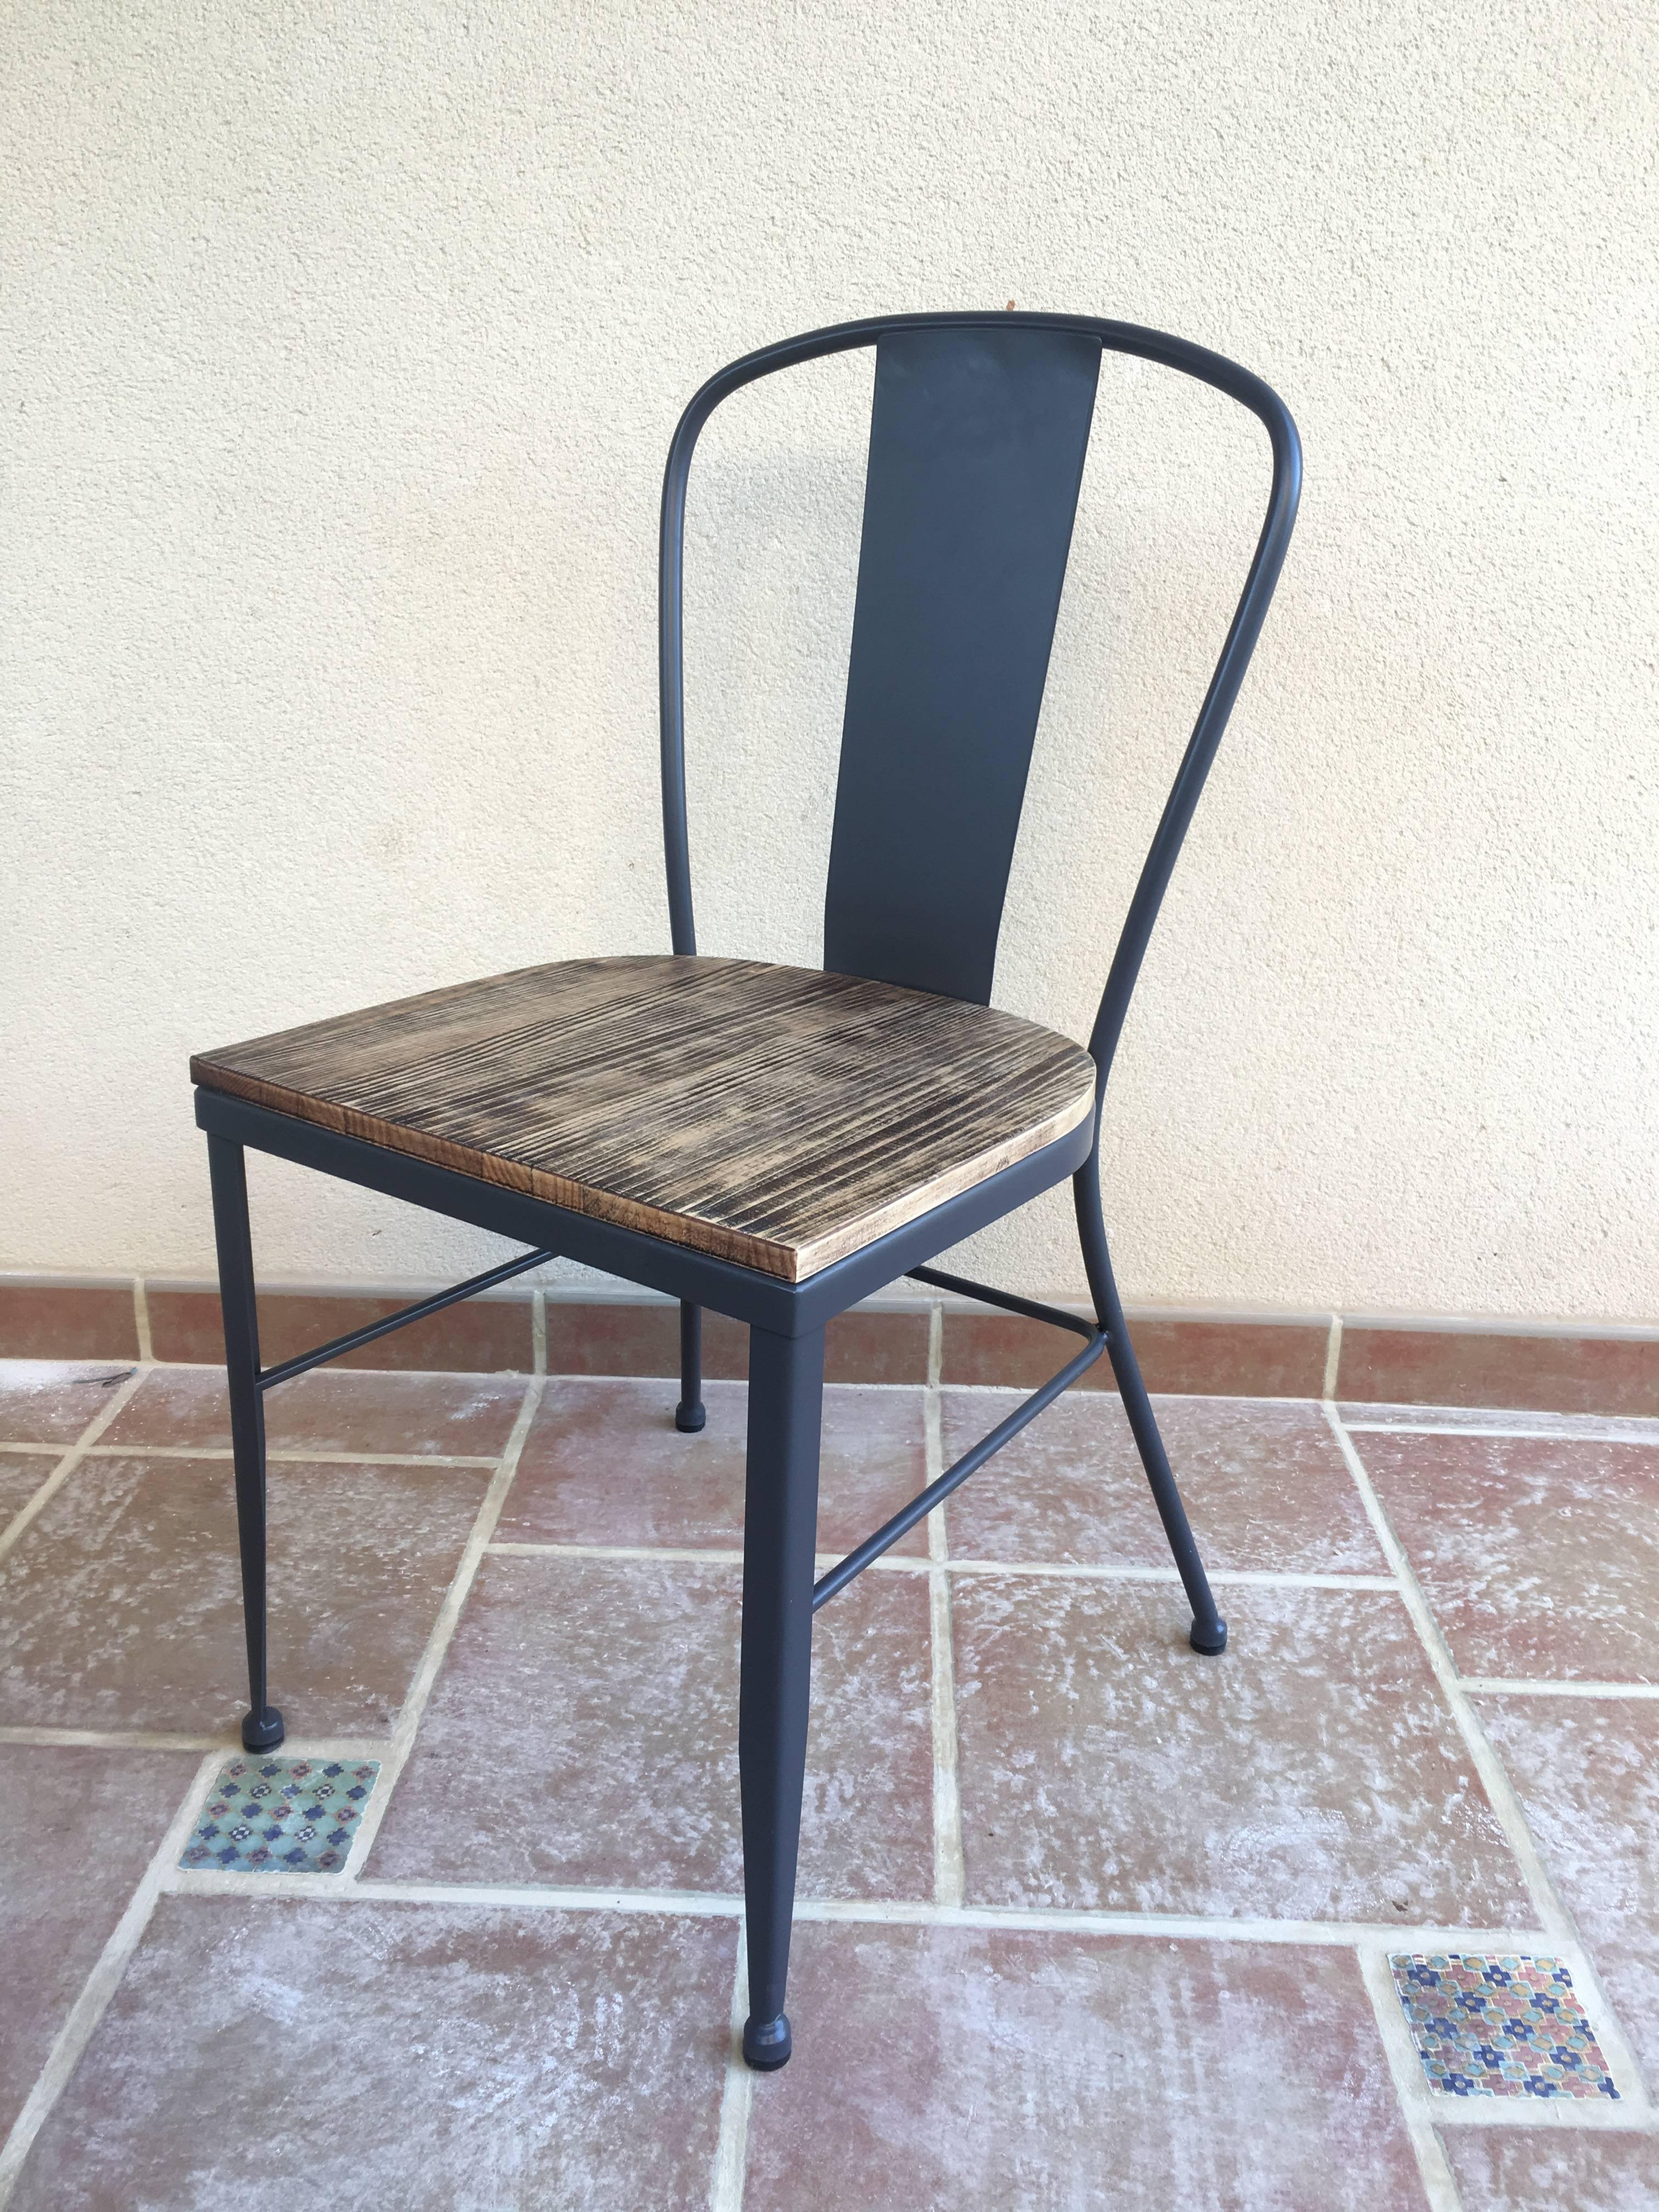 21st Century Wrought Iron Set of Patio Dining Table & Chairs. Indoor & Outdoor For Sale 1